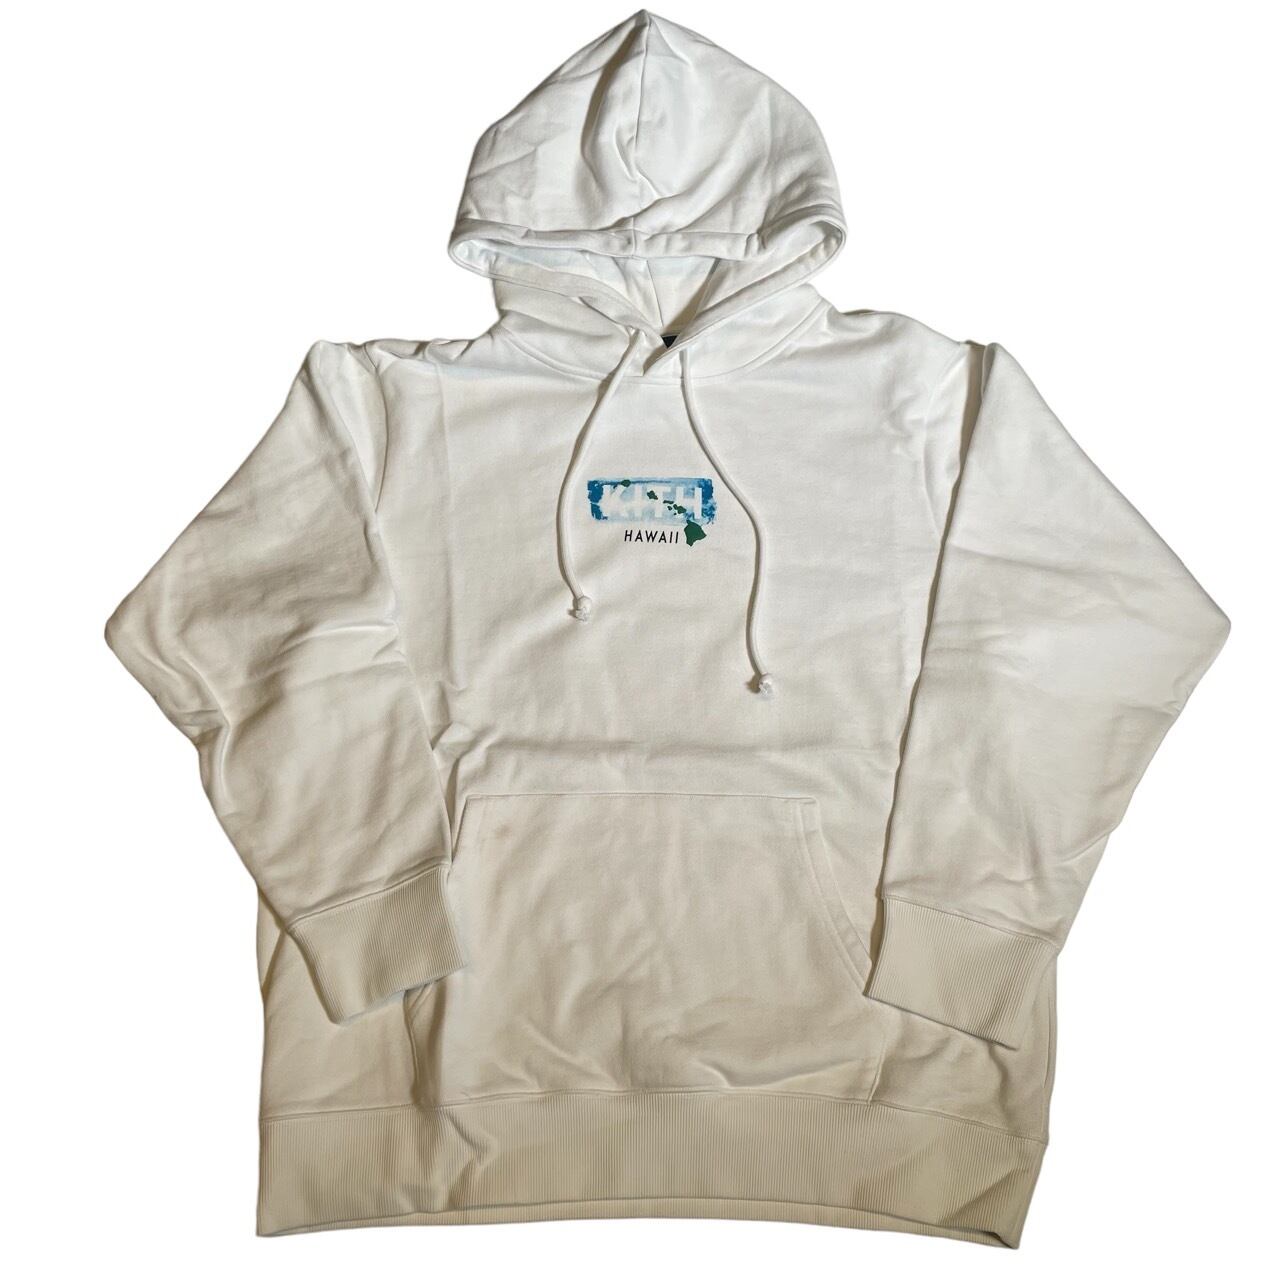 Kith Hawaii Classic Logo Hoodie XL | RECEPTION SNEAKER powered by BASE